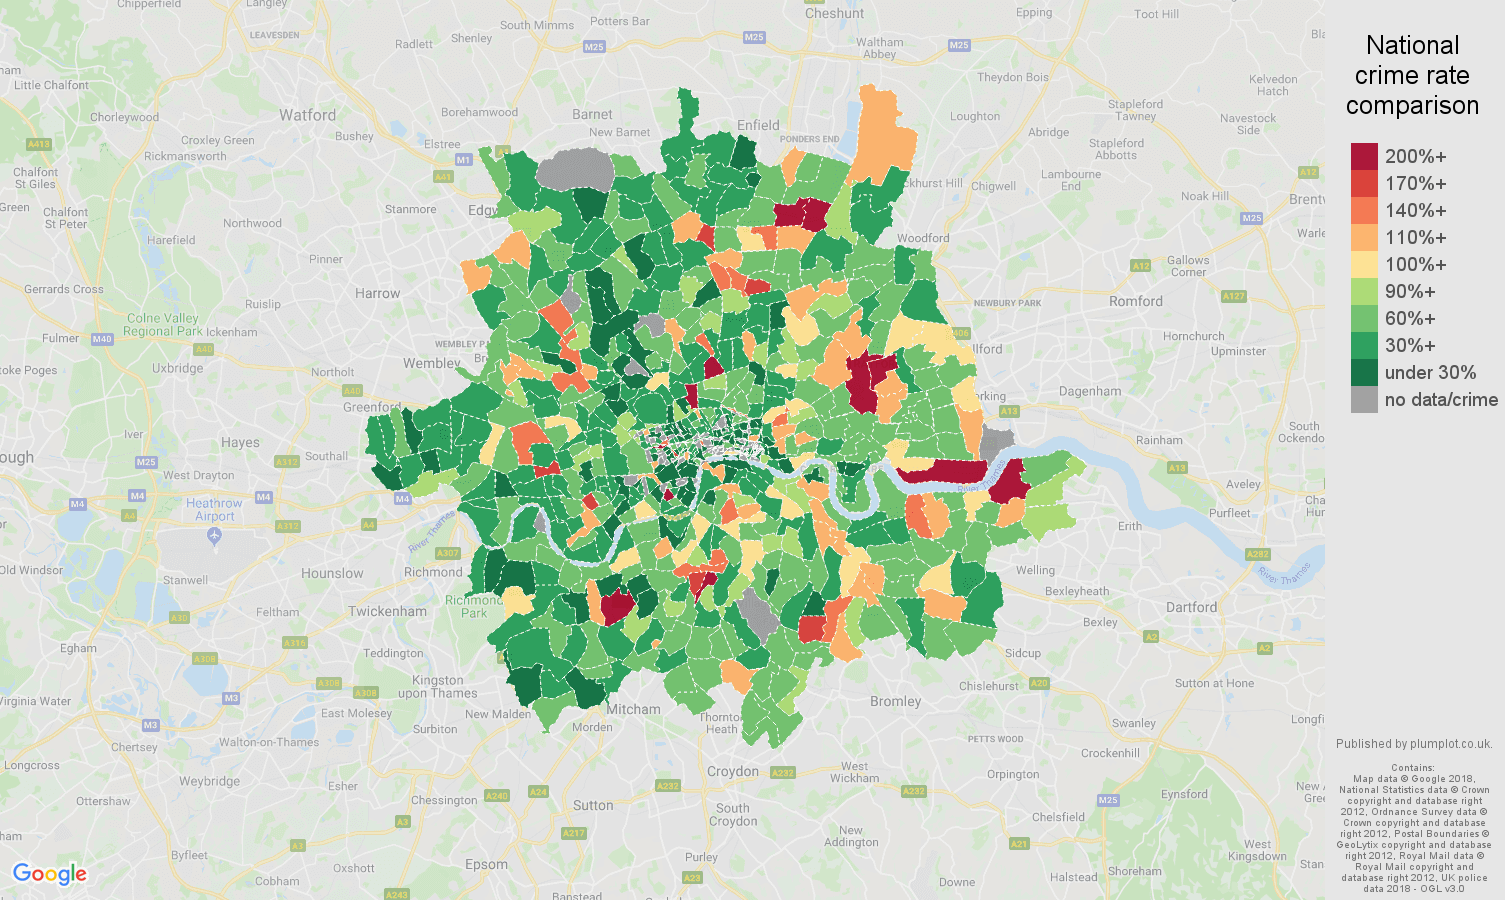 Inner London other crime rate comparison map